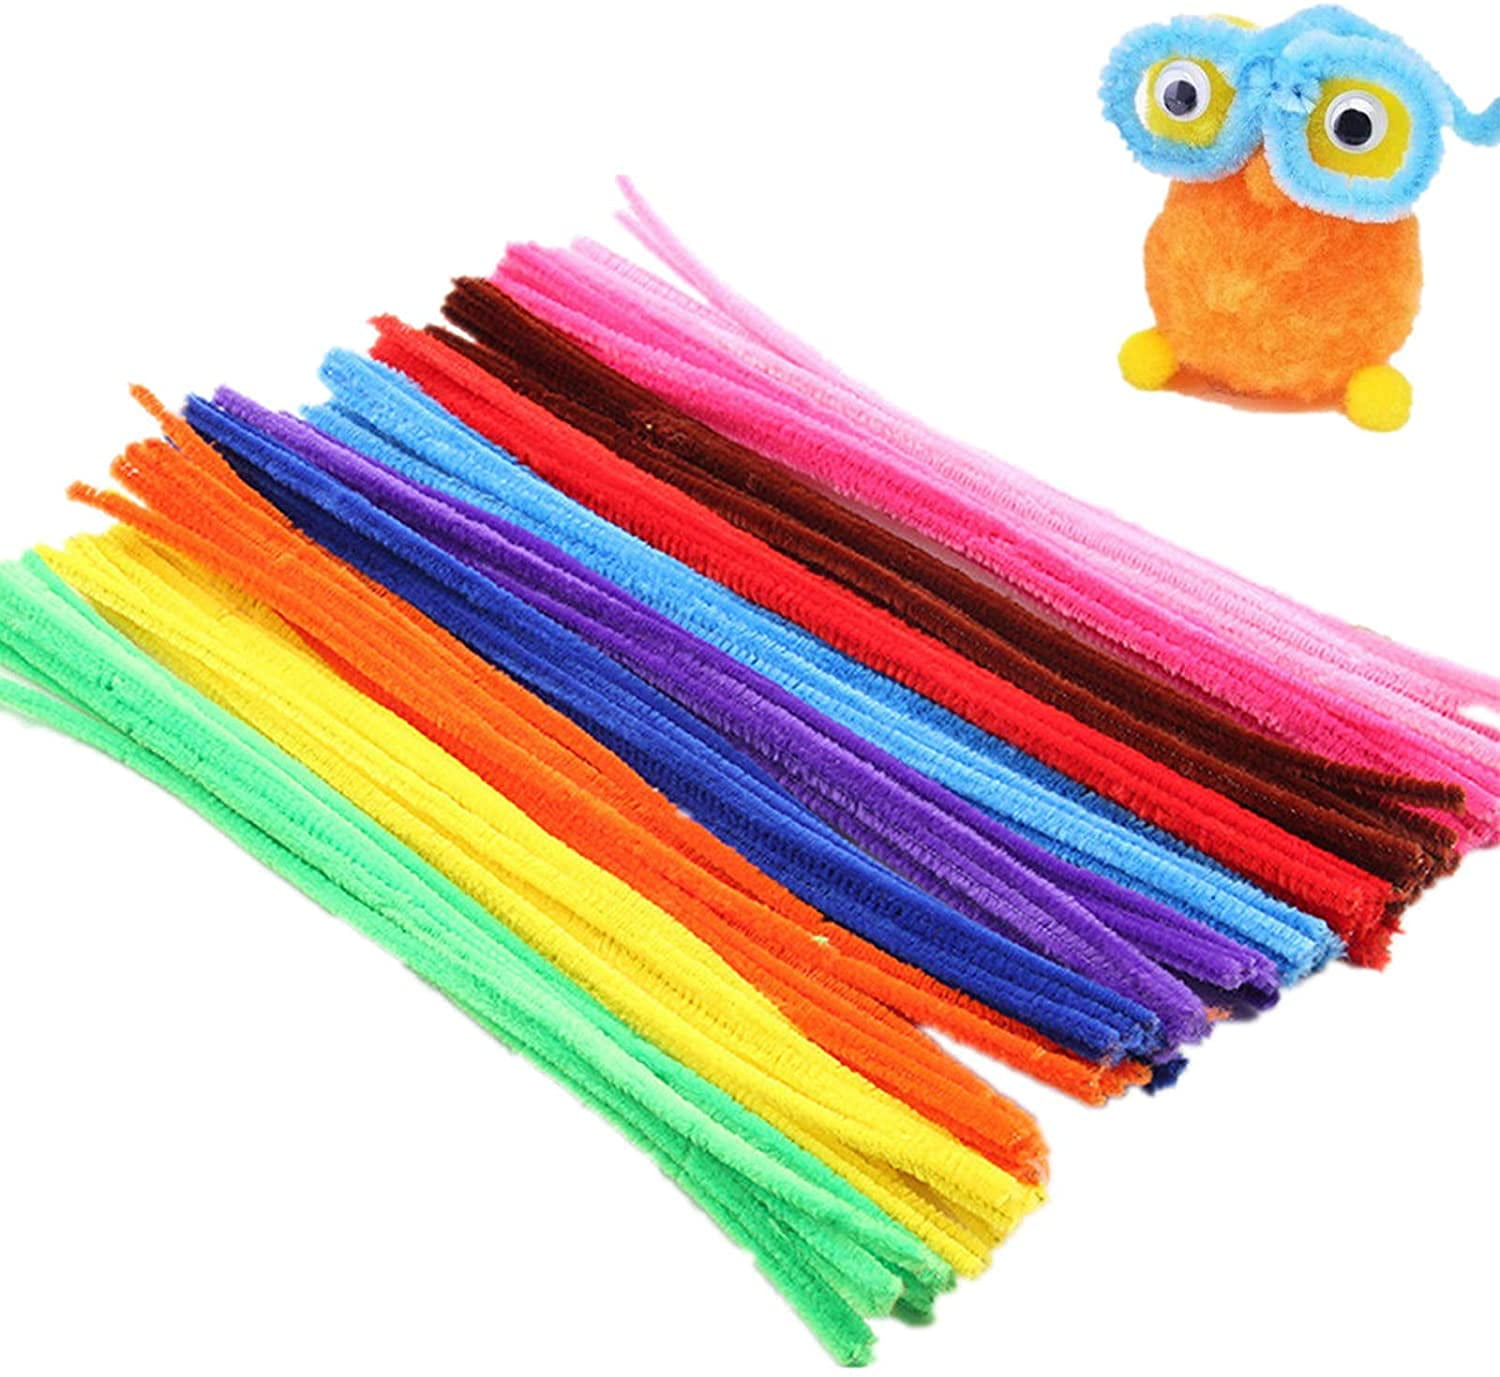 YUEHAO 100 Pieces Gold Pipe Cleaners Craft Supplies Flexible Chenille Stems  for DIY Crafts Project and Decoration (6 mm x 12 Inch) 